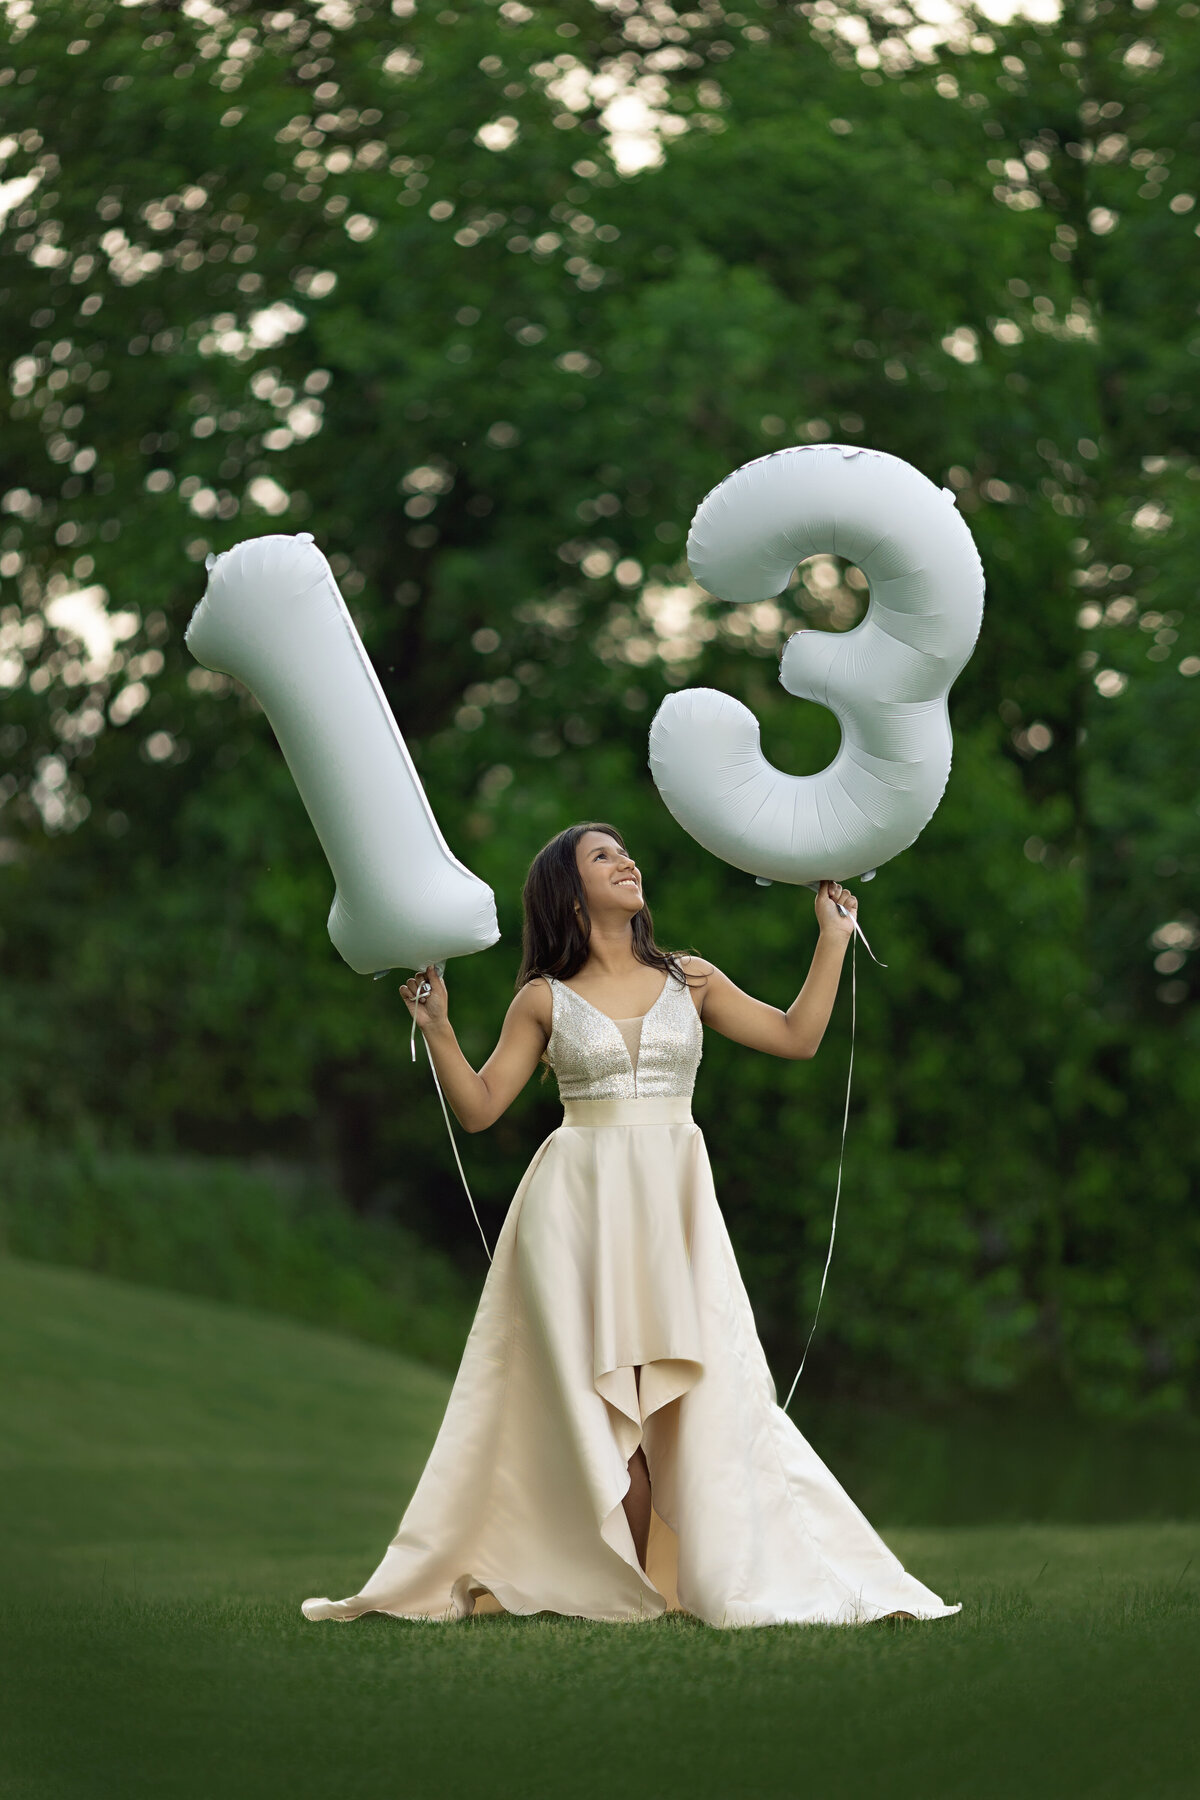 A teen girl in a cream dress holds a 1 and 3 balloon in a park